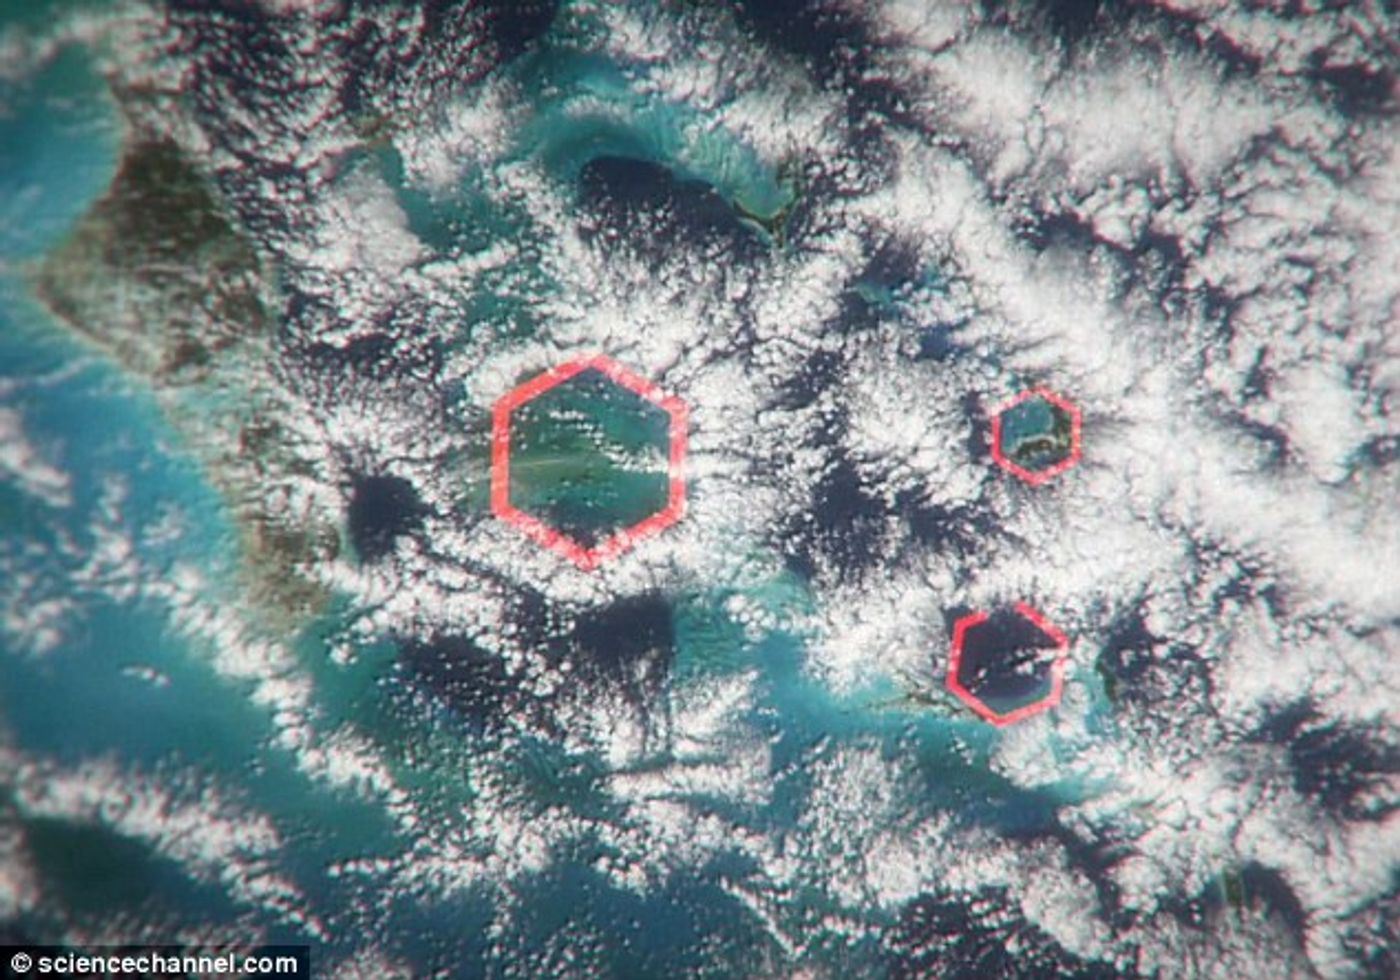 Hexagonally-shaped clouds over the Bermuda Triangle suggest the presence of 'air bombs,' otherwise known as microbursts.